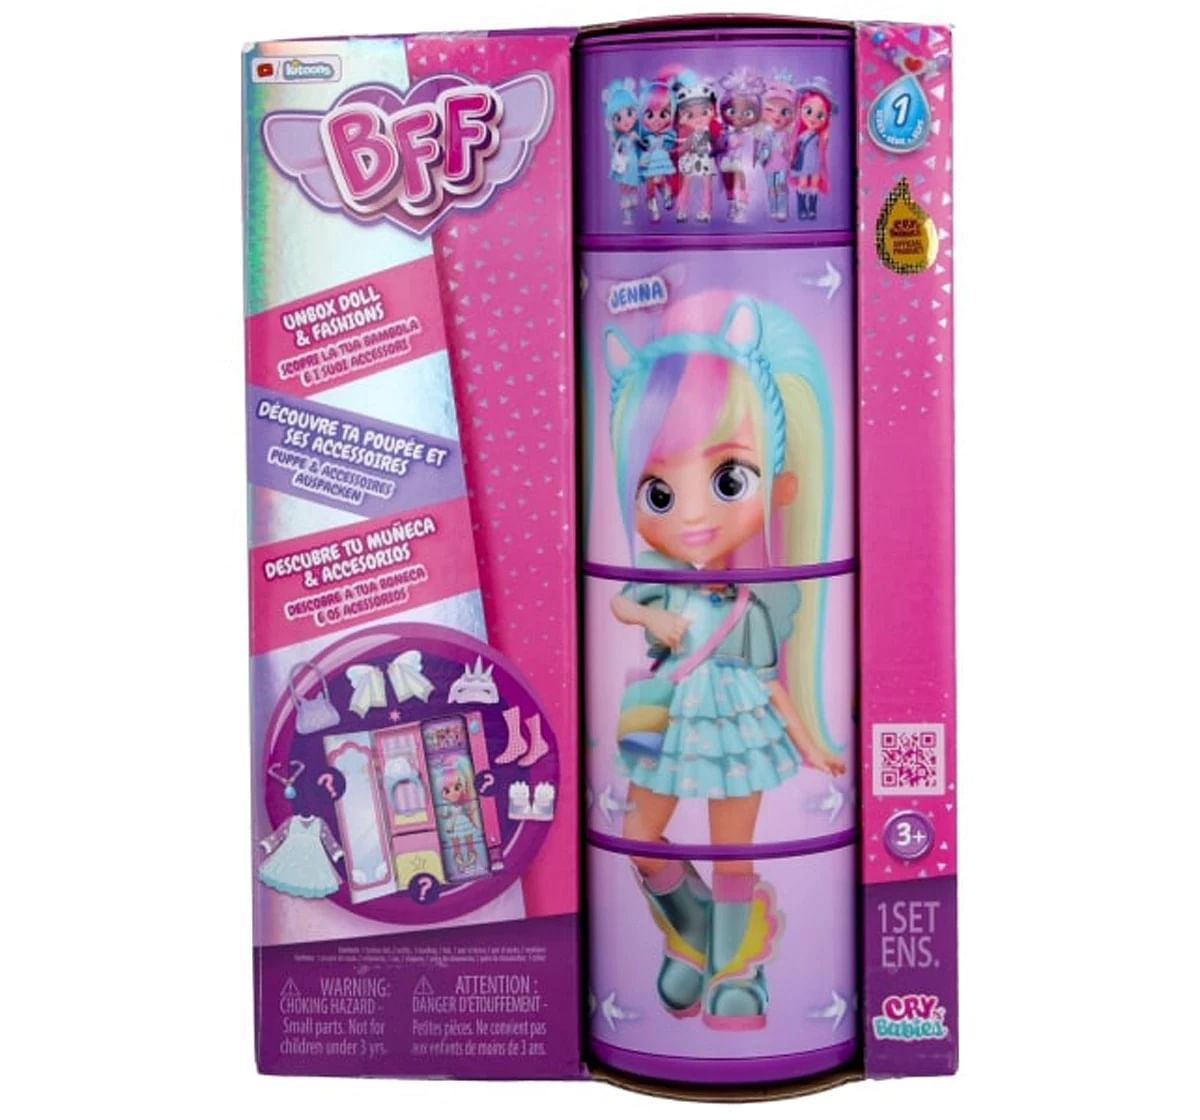 BFF Series Fashion Play Doll with Long Hair & Glass Eyes, Dolls For Kids